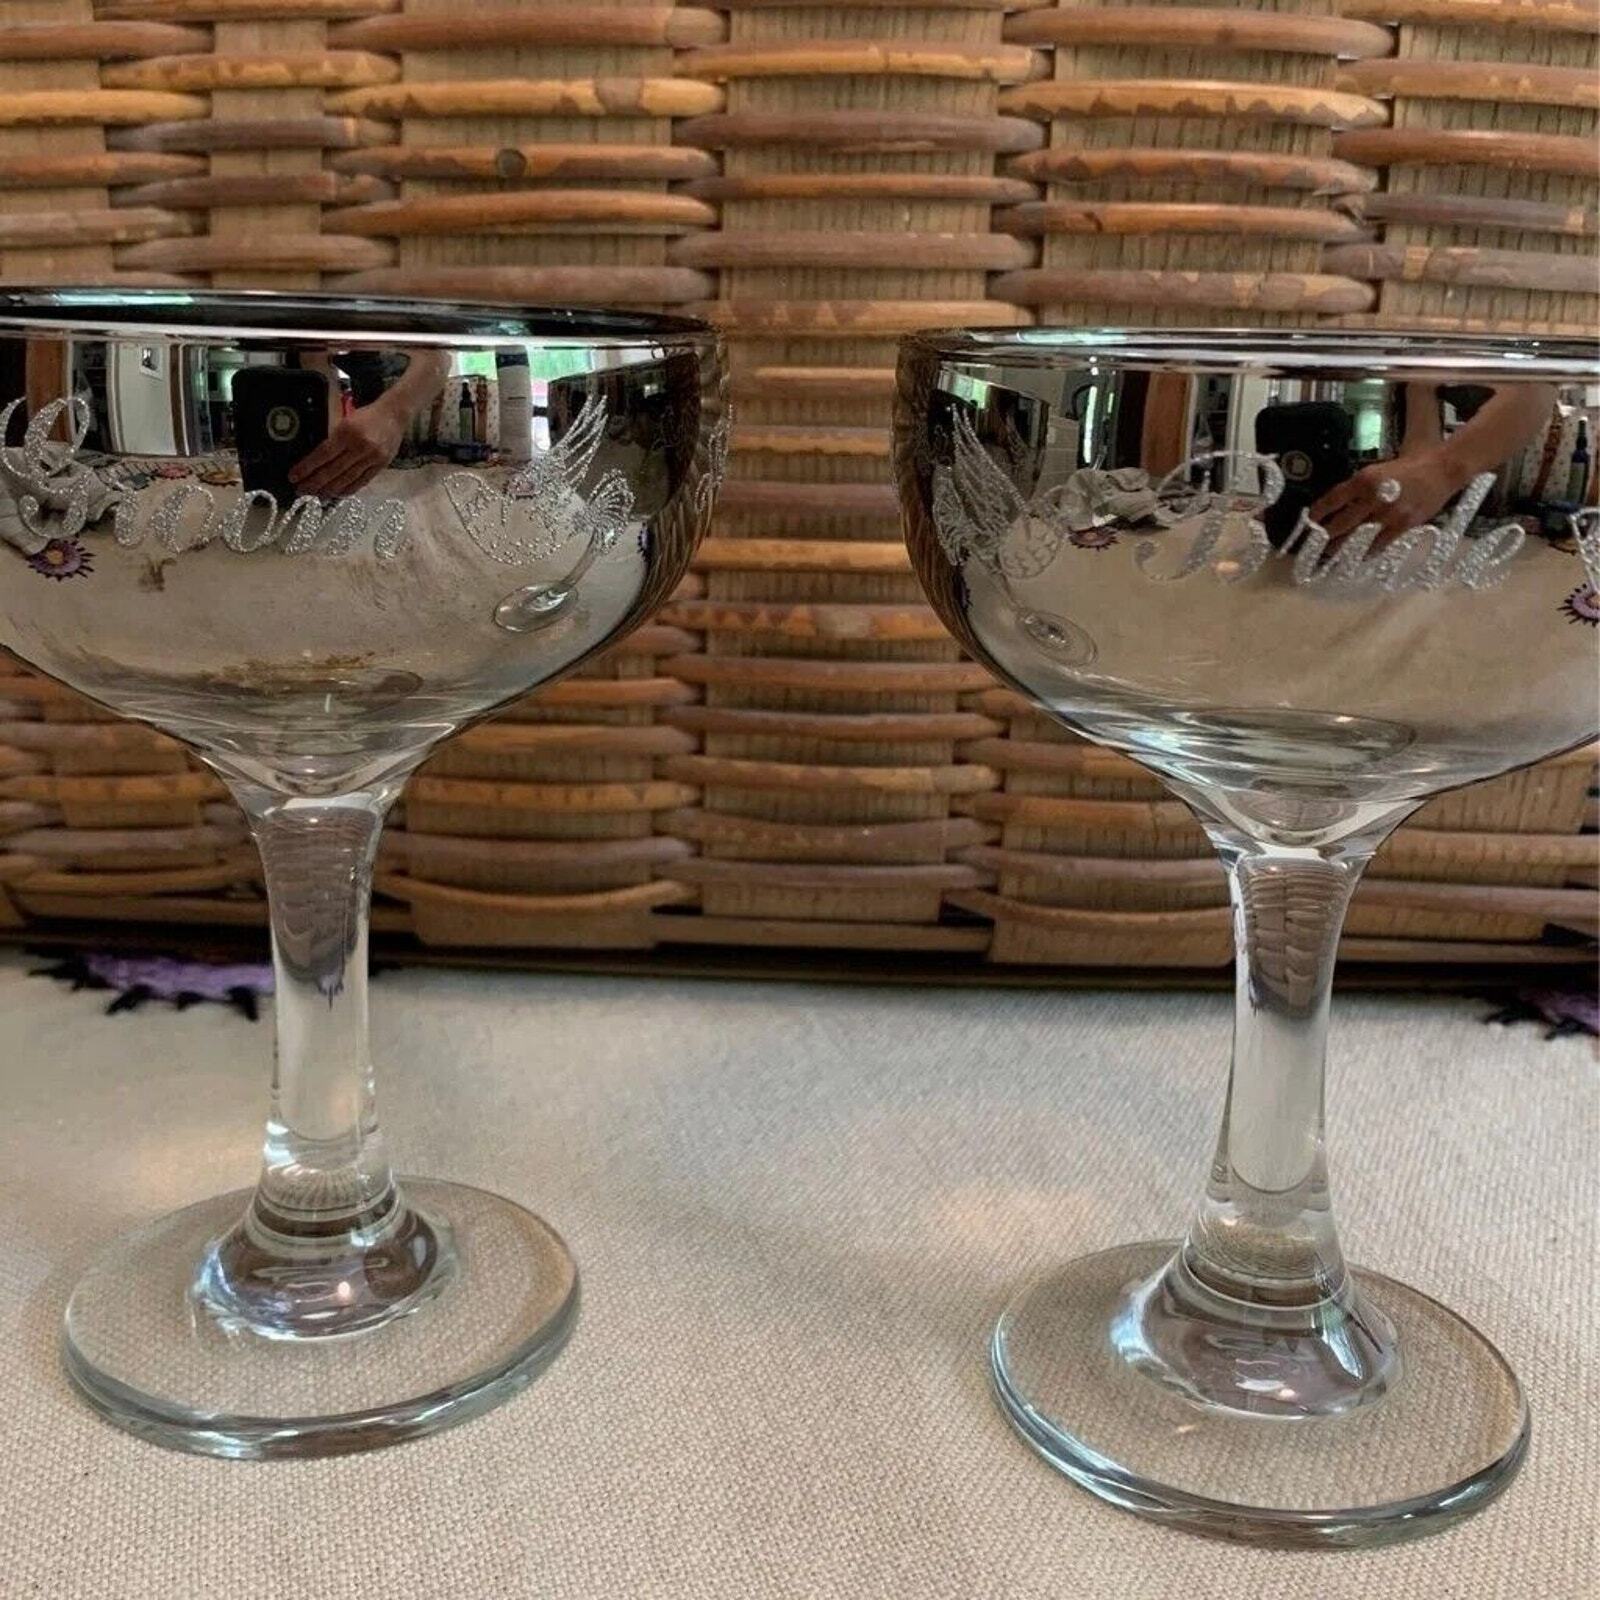 Vintage Bride and Groom Champagne Coupe` Saucer Glasses by Libbey